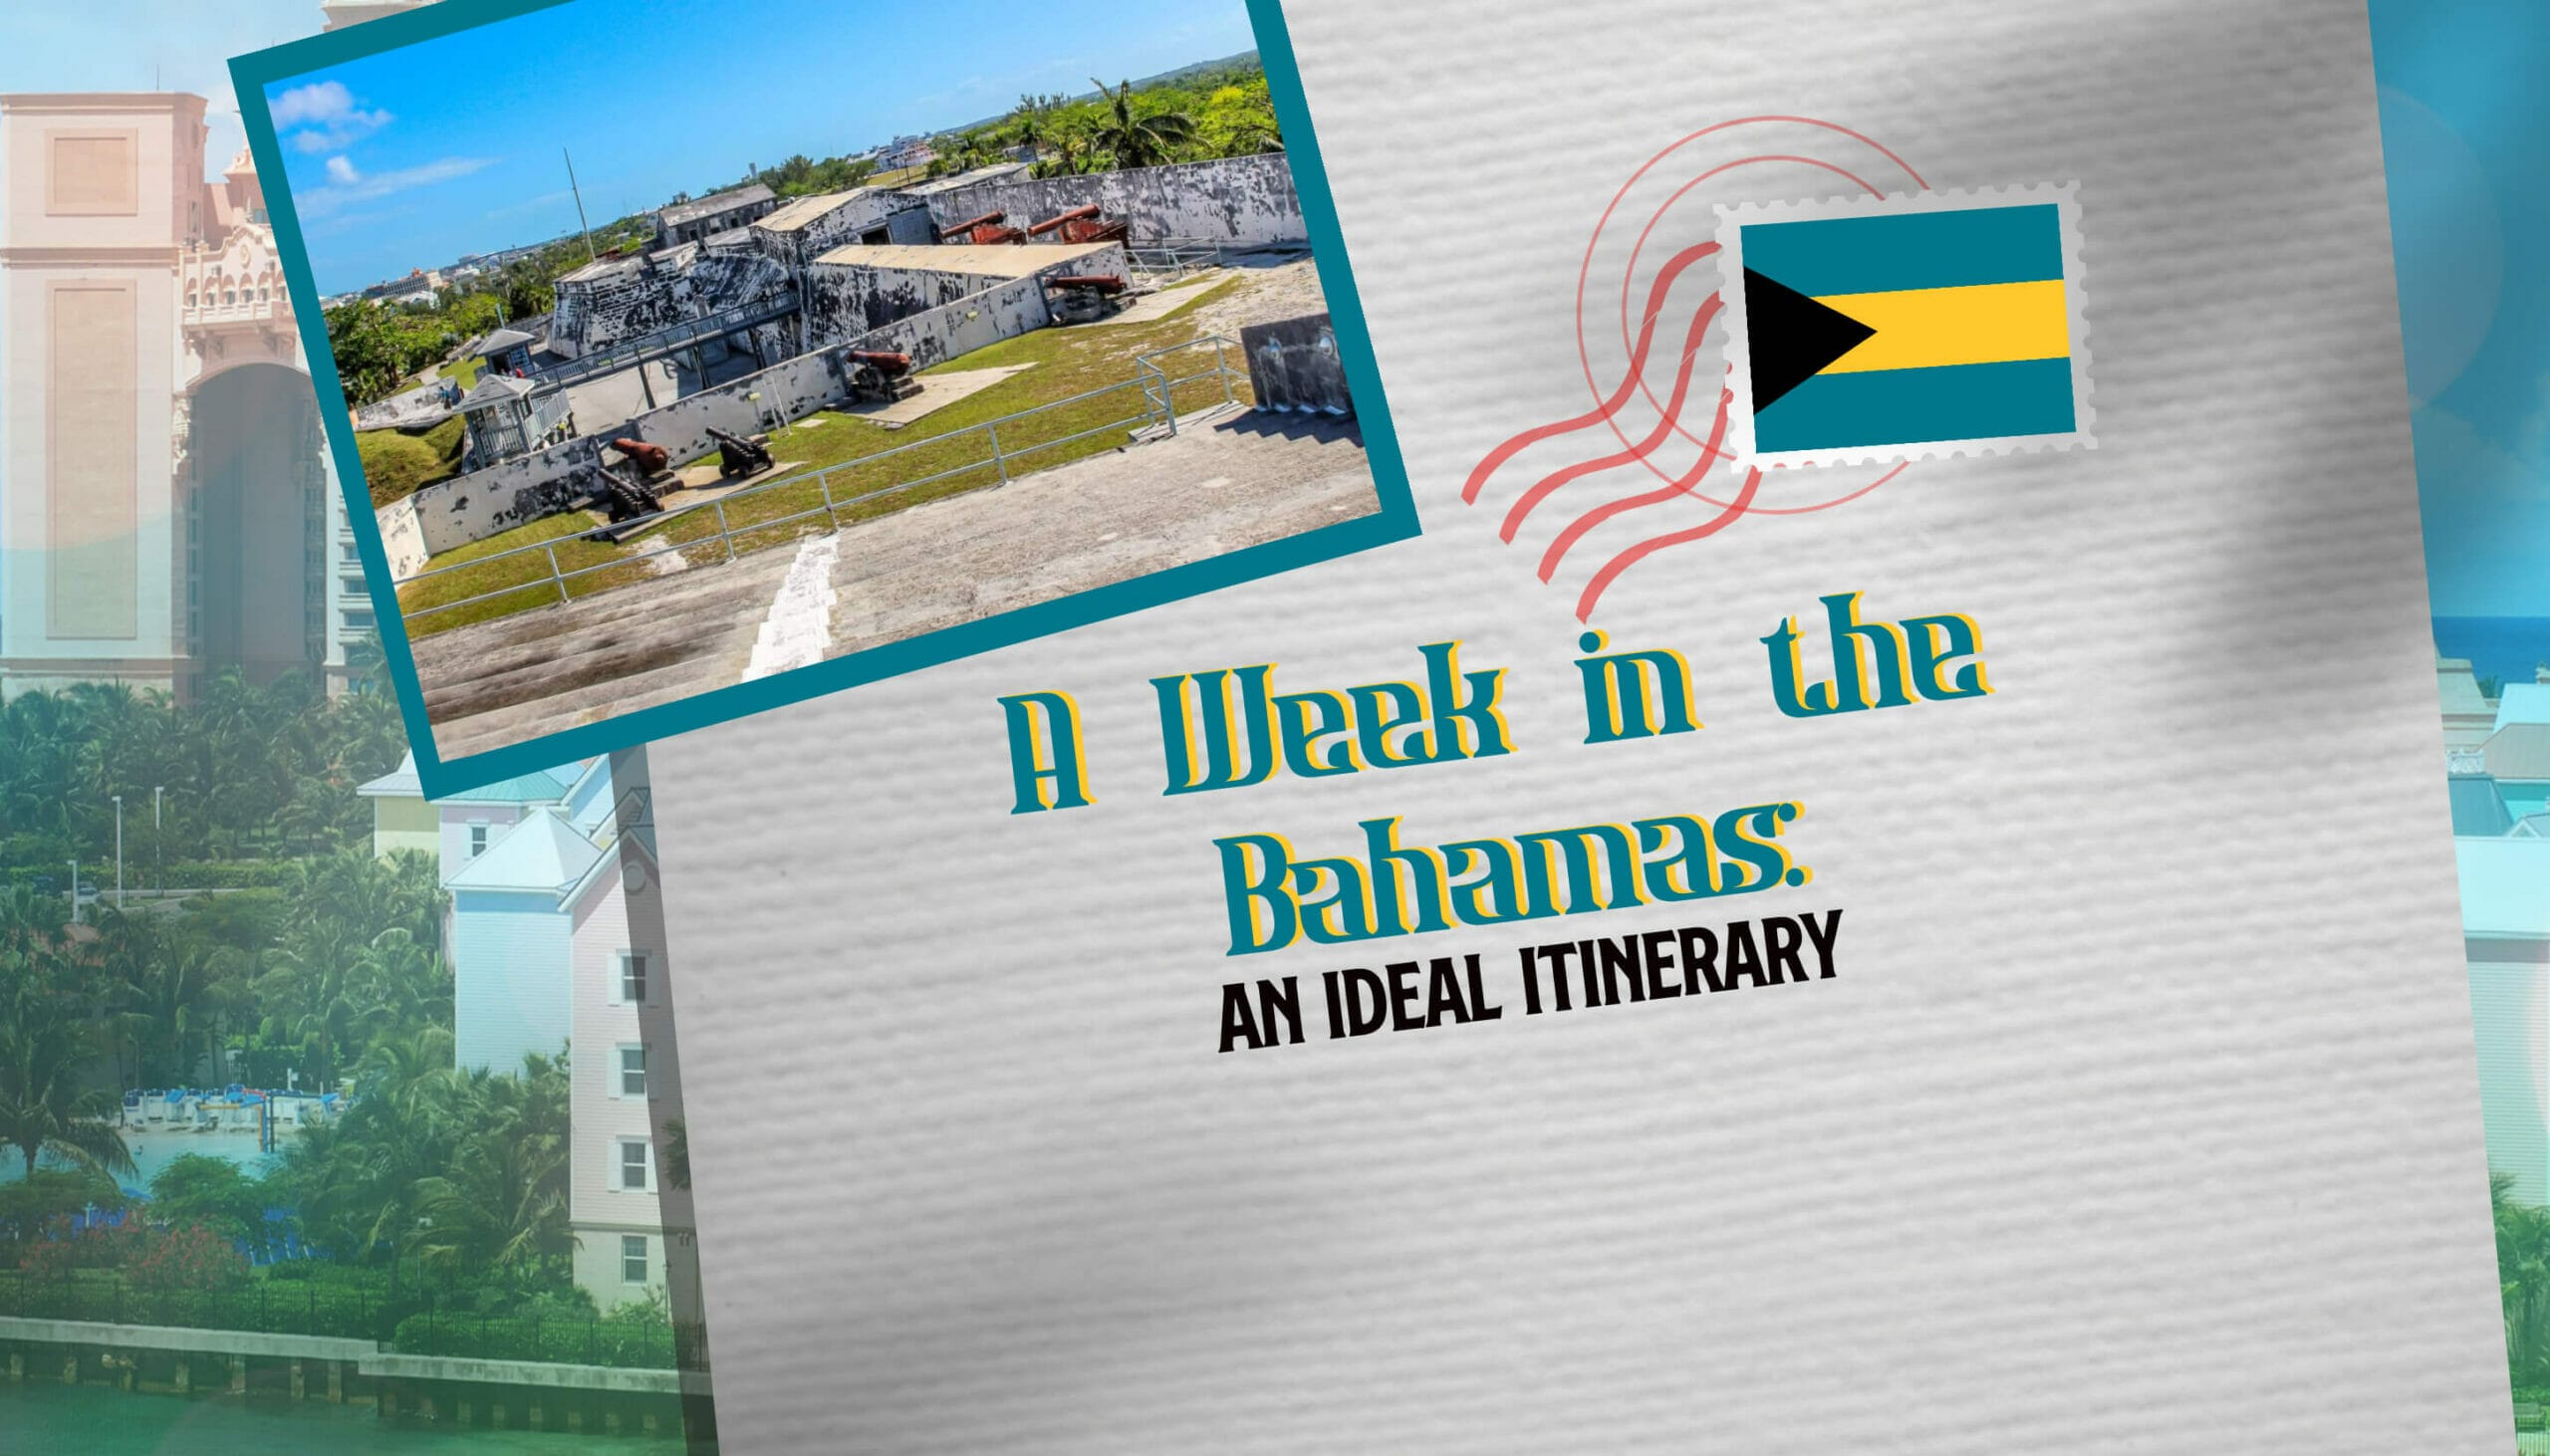 A Week in the Bahamas An Ideal Itinerary